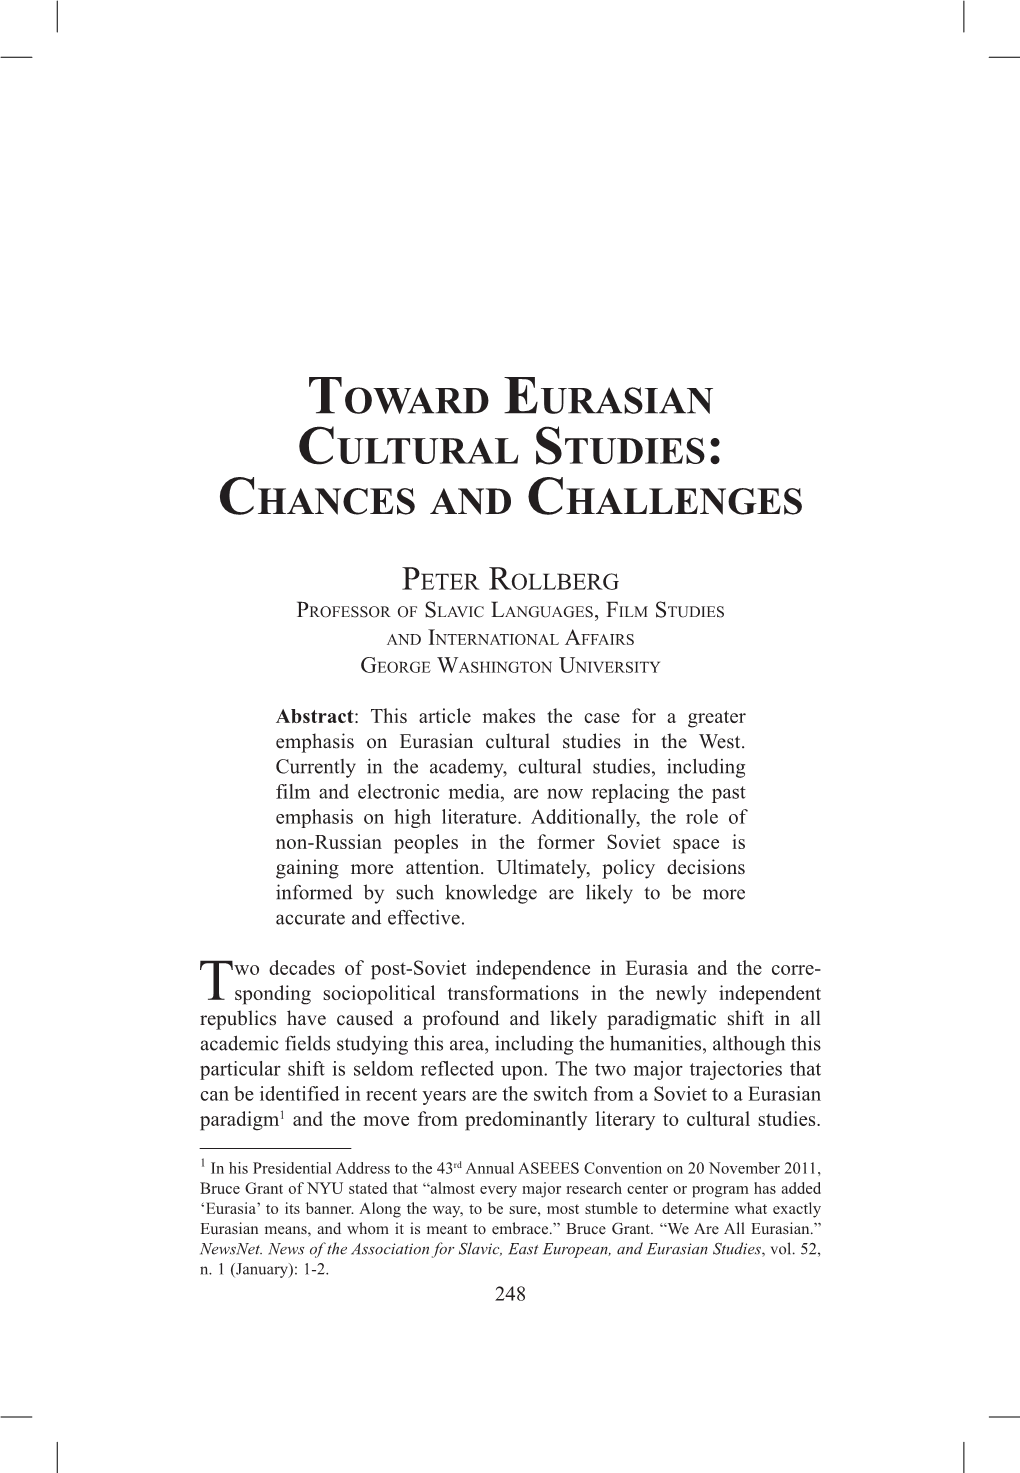 Toward Eurasian Cultural Studies: Chances and Challenges